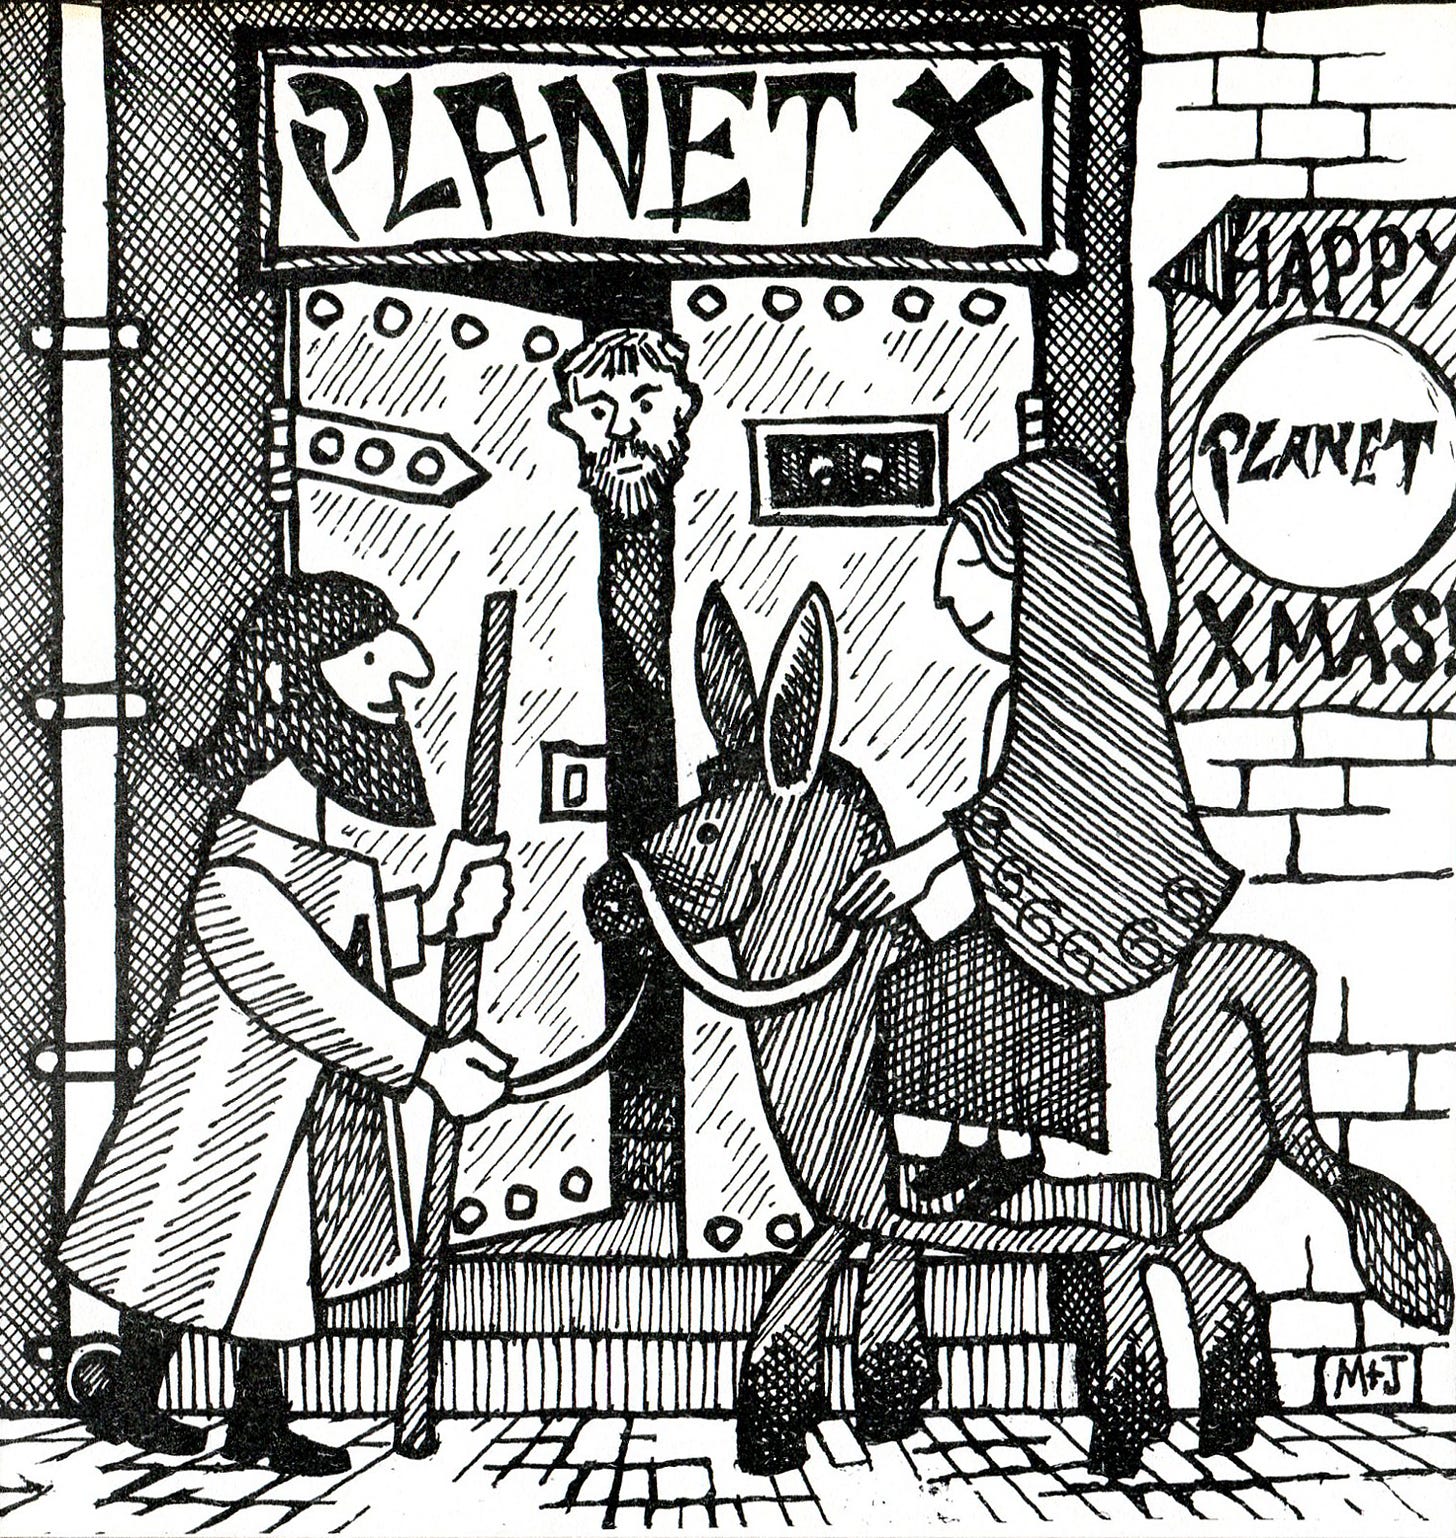 Drawing of Mary, Joseph and the donkey at the door of Planet X.